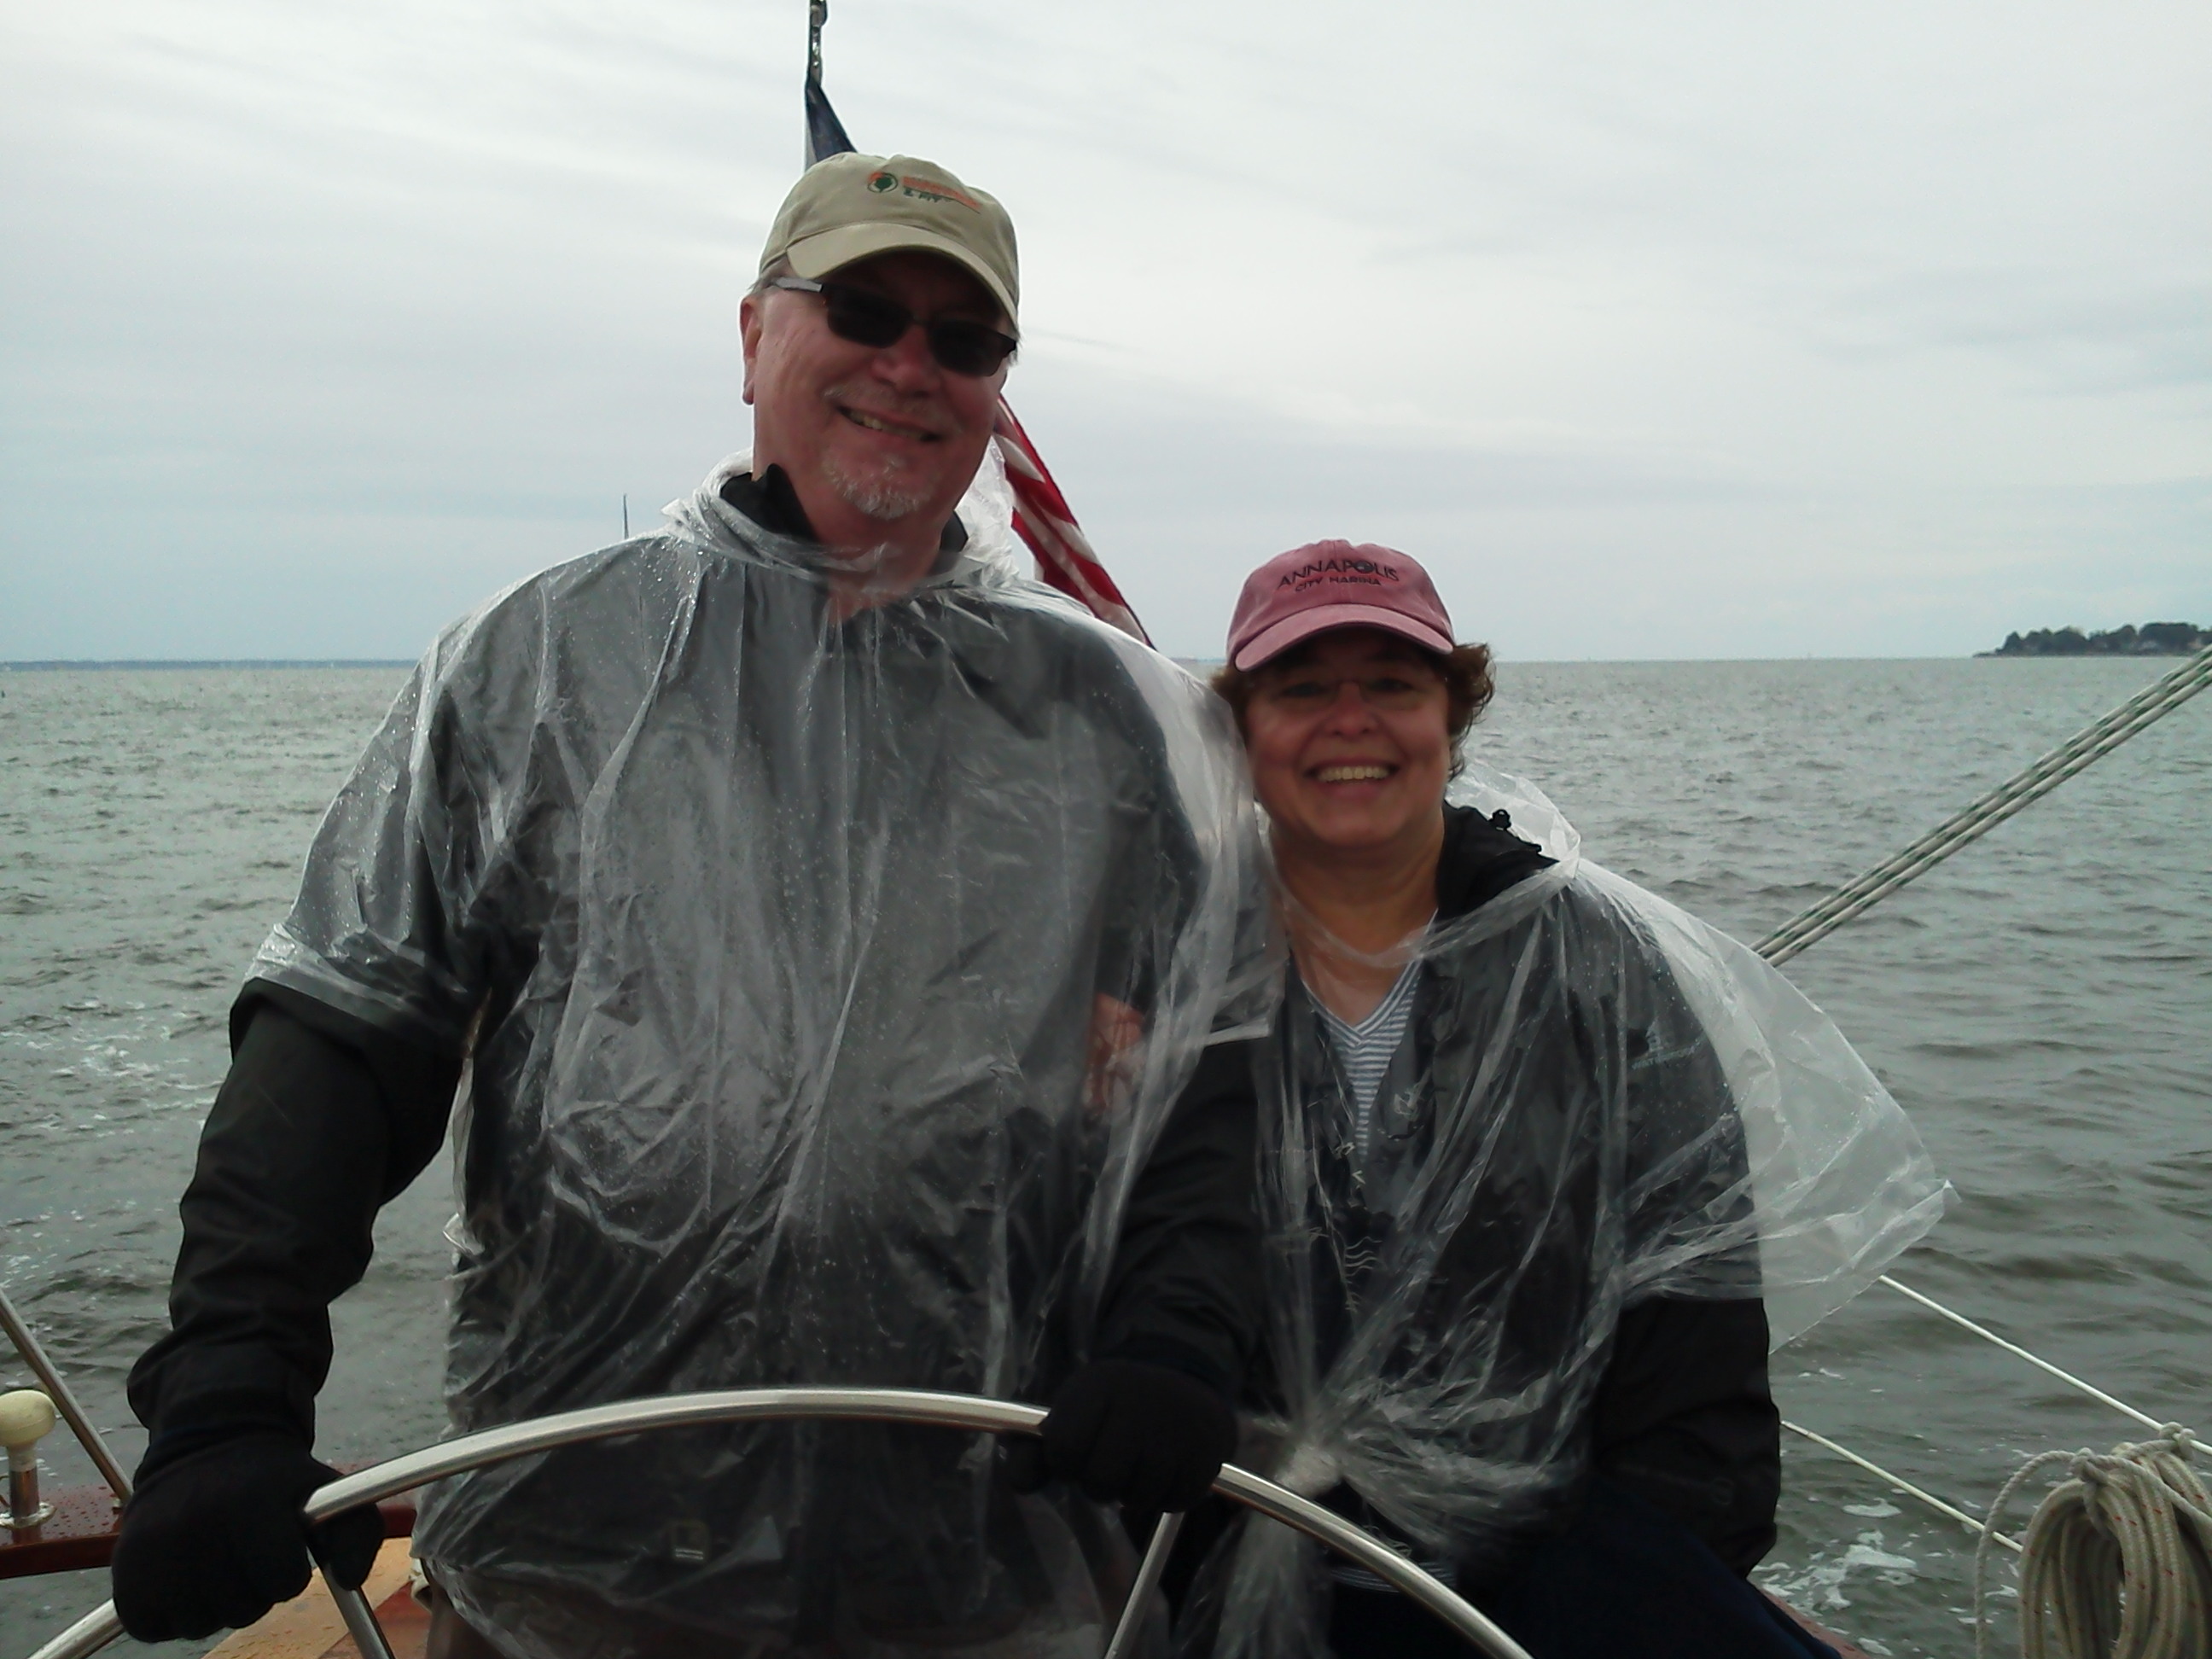 Fred and Jody Krazeise at the helm of Woodwind in clear ponchos